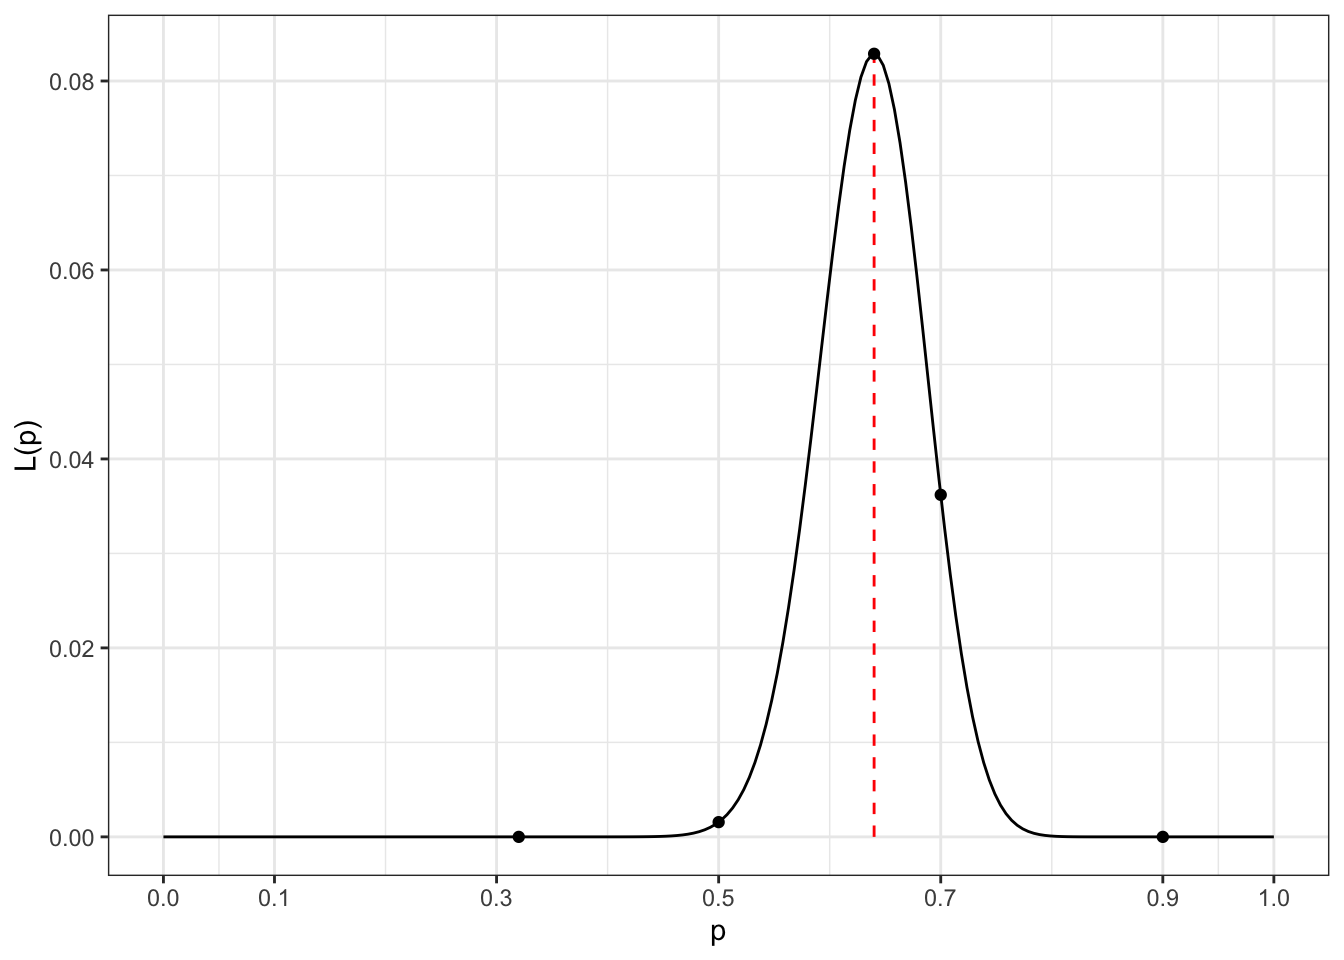 Likelihood function $L(p)$ when 64 heads are observed out of 100 coin flips.